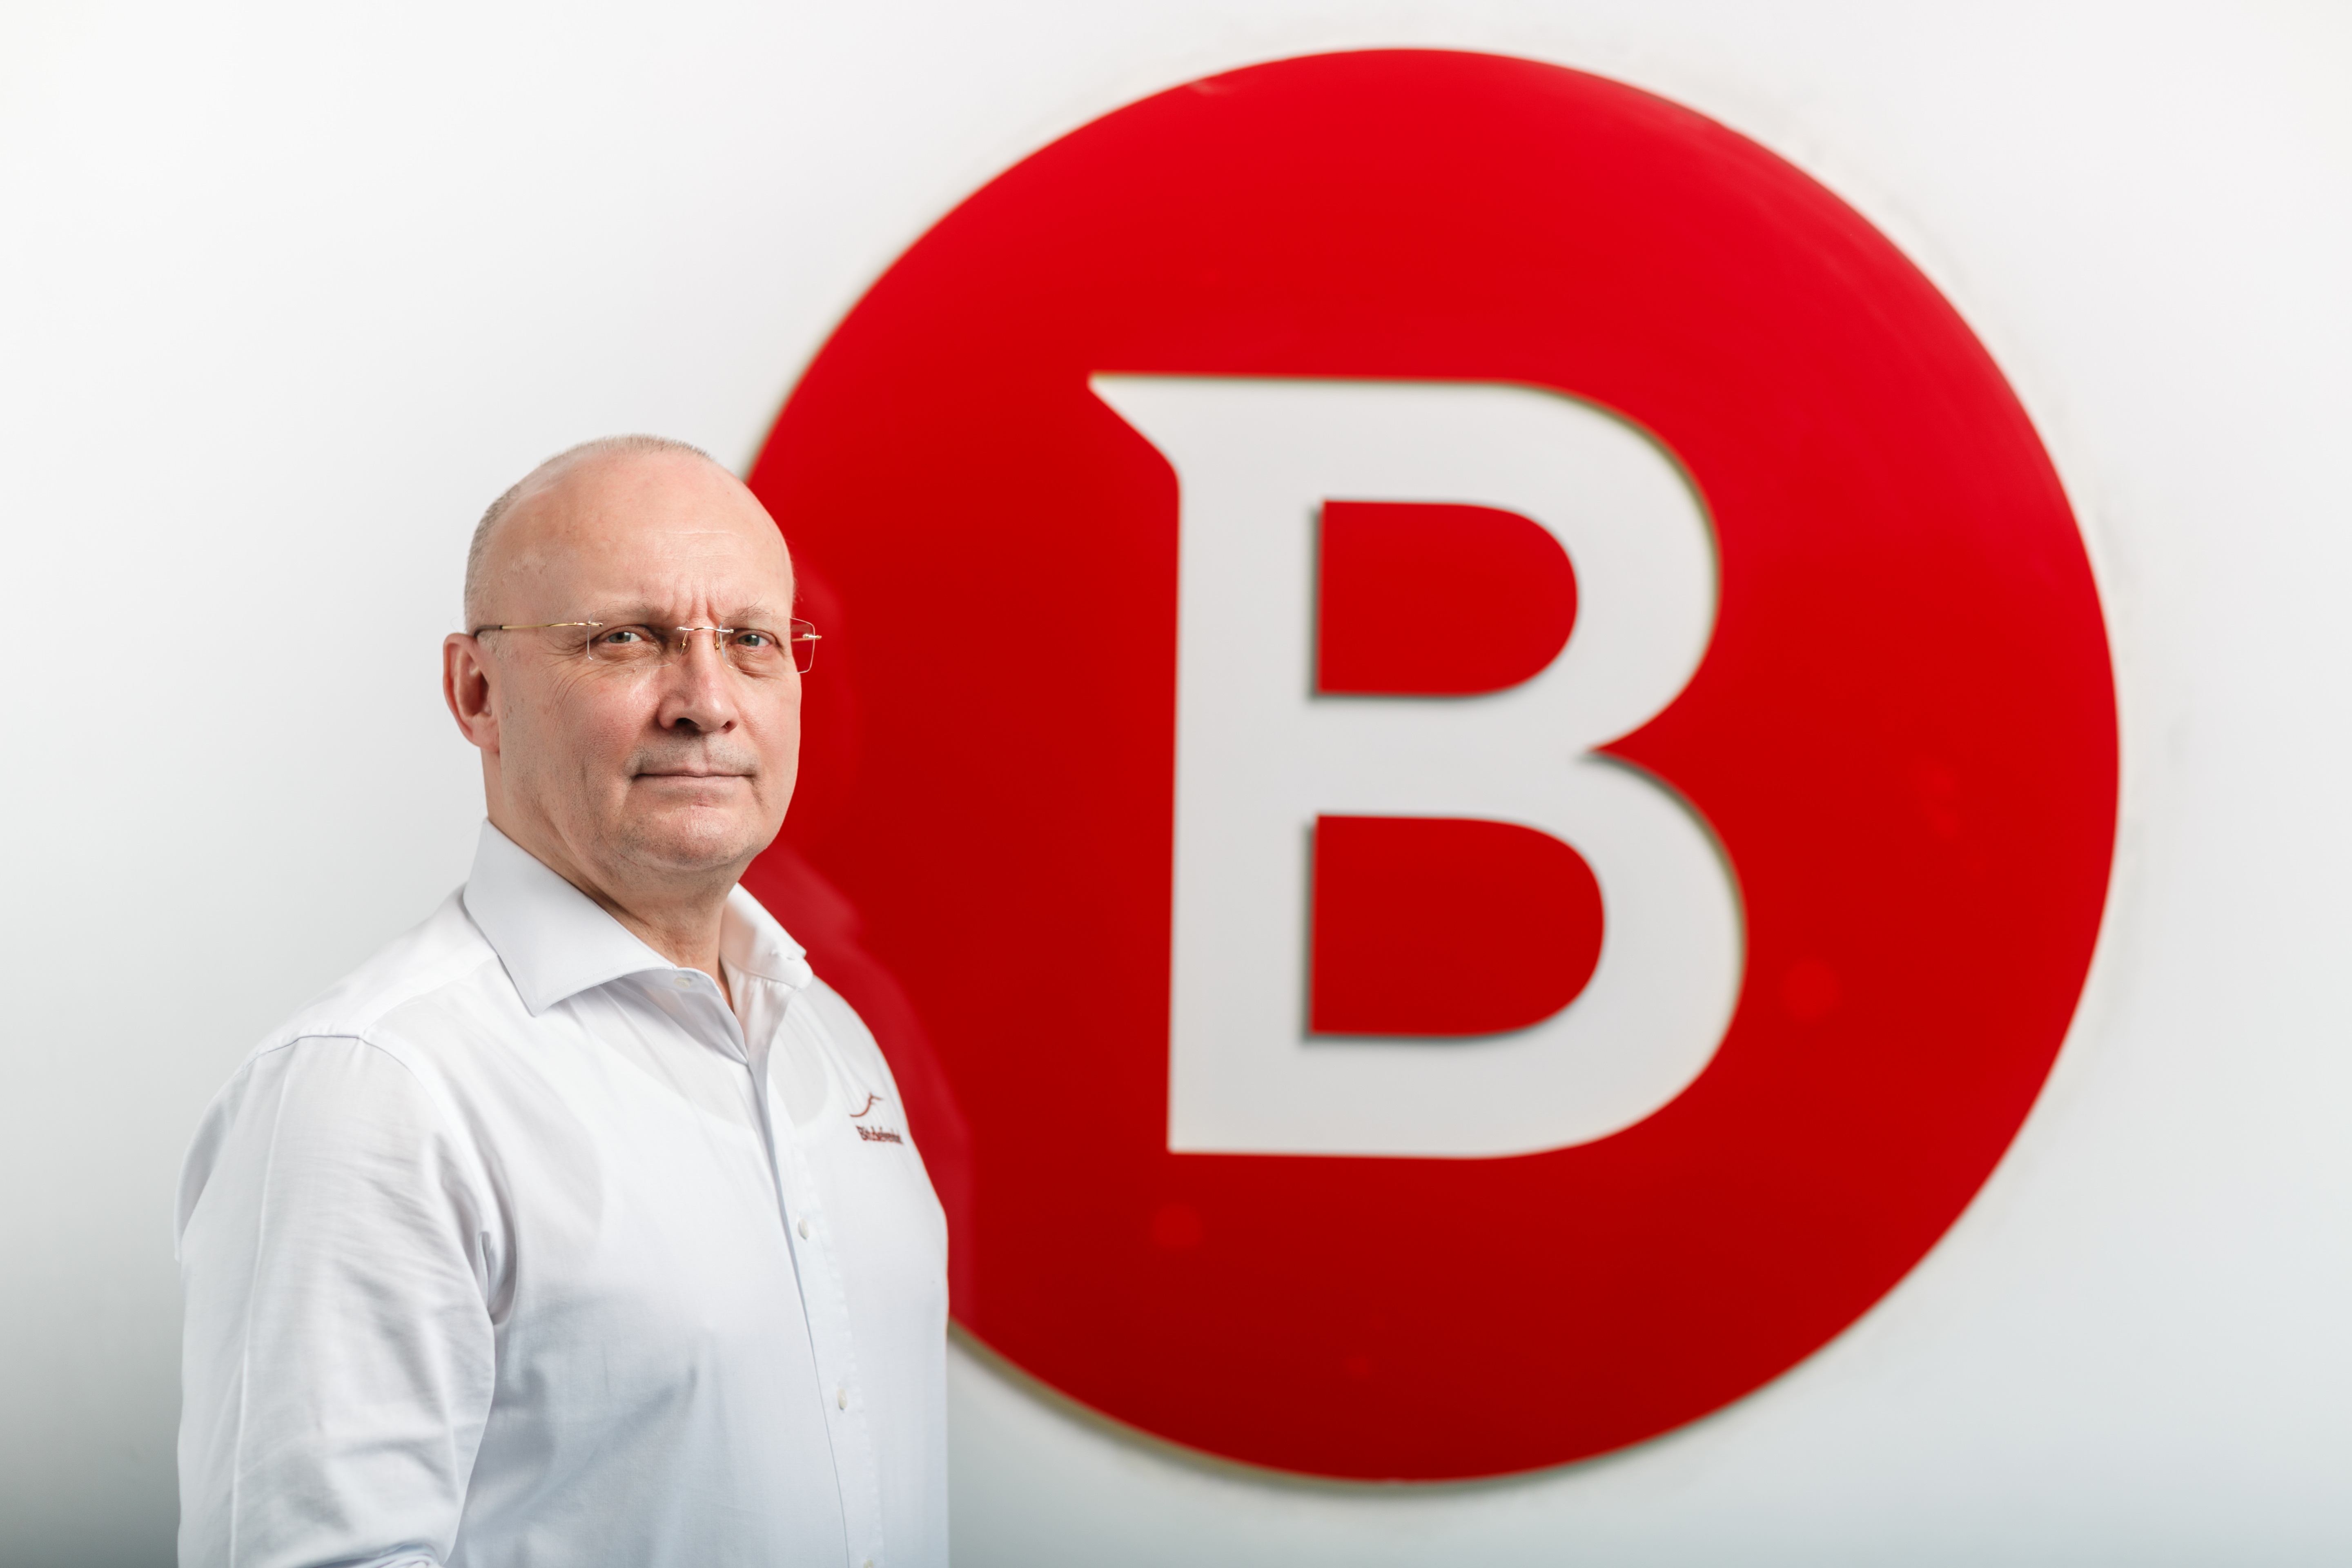 IT Talent Creates Major Hub in the IT World in Central, Eastern Europe, Bitdefender founder says